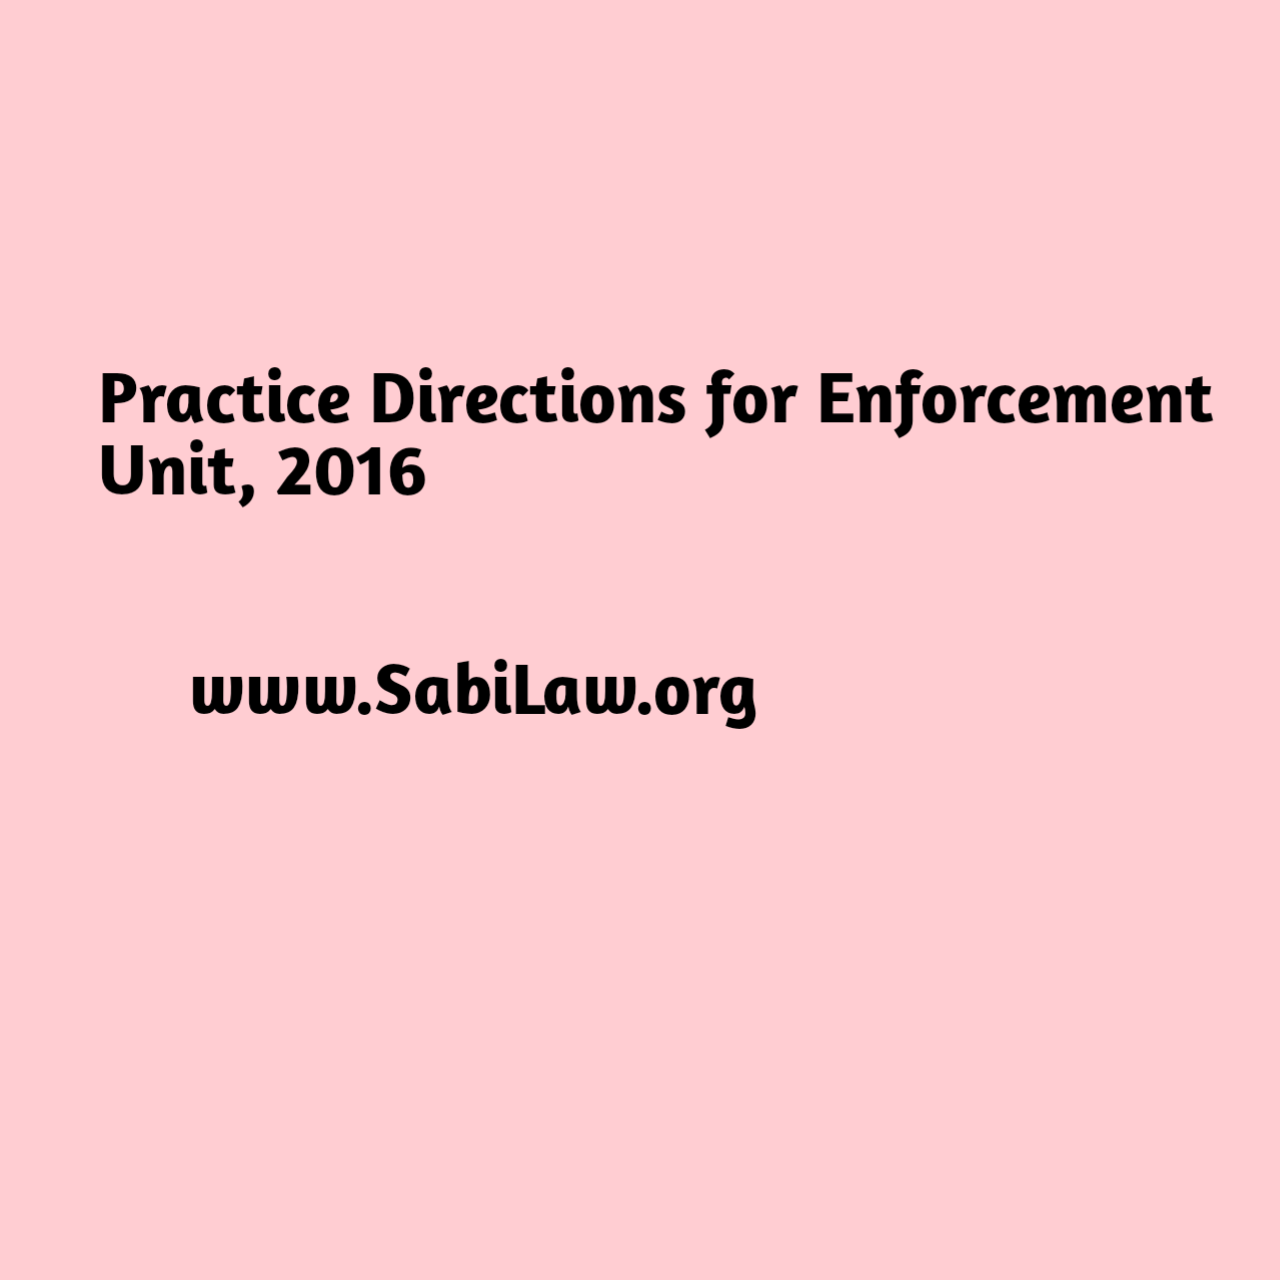 Click to download the Practice Directions for Enforcement Unit.